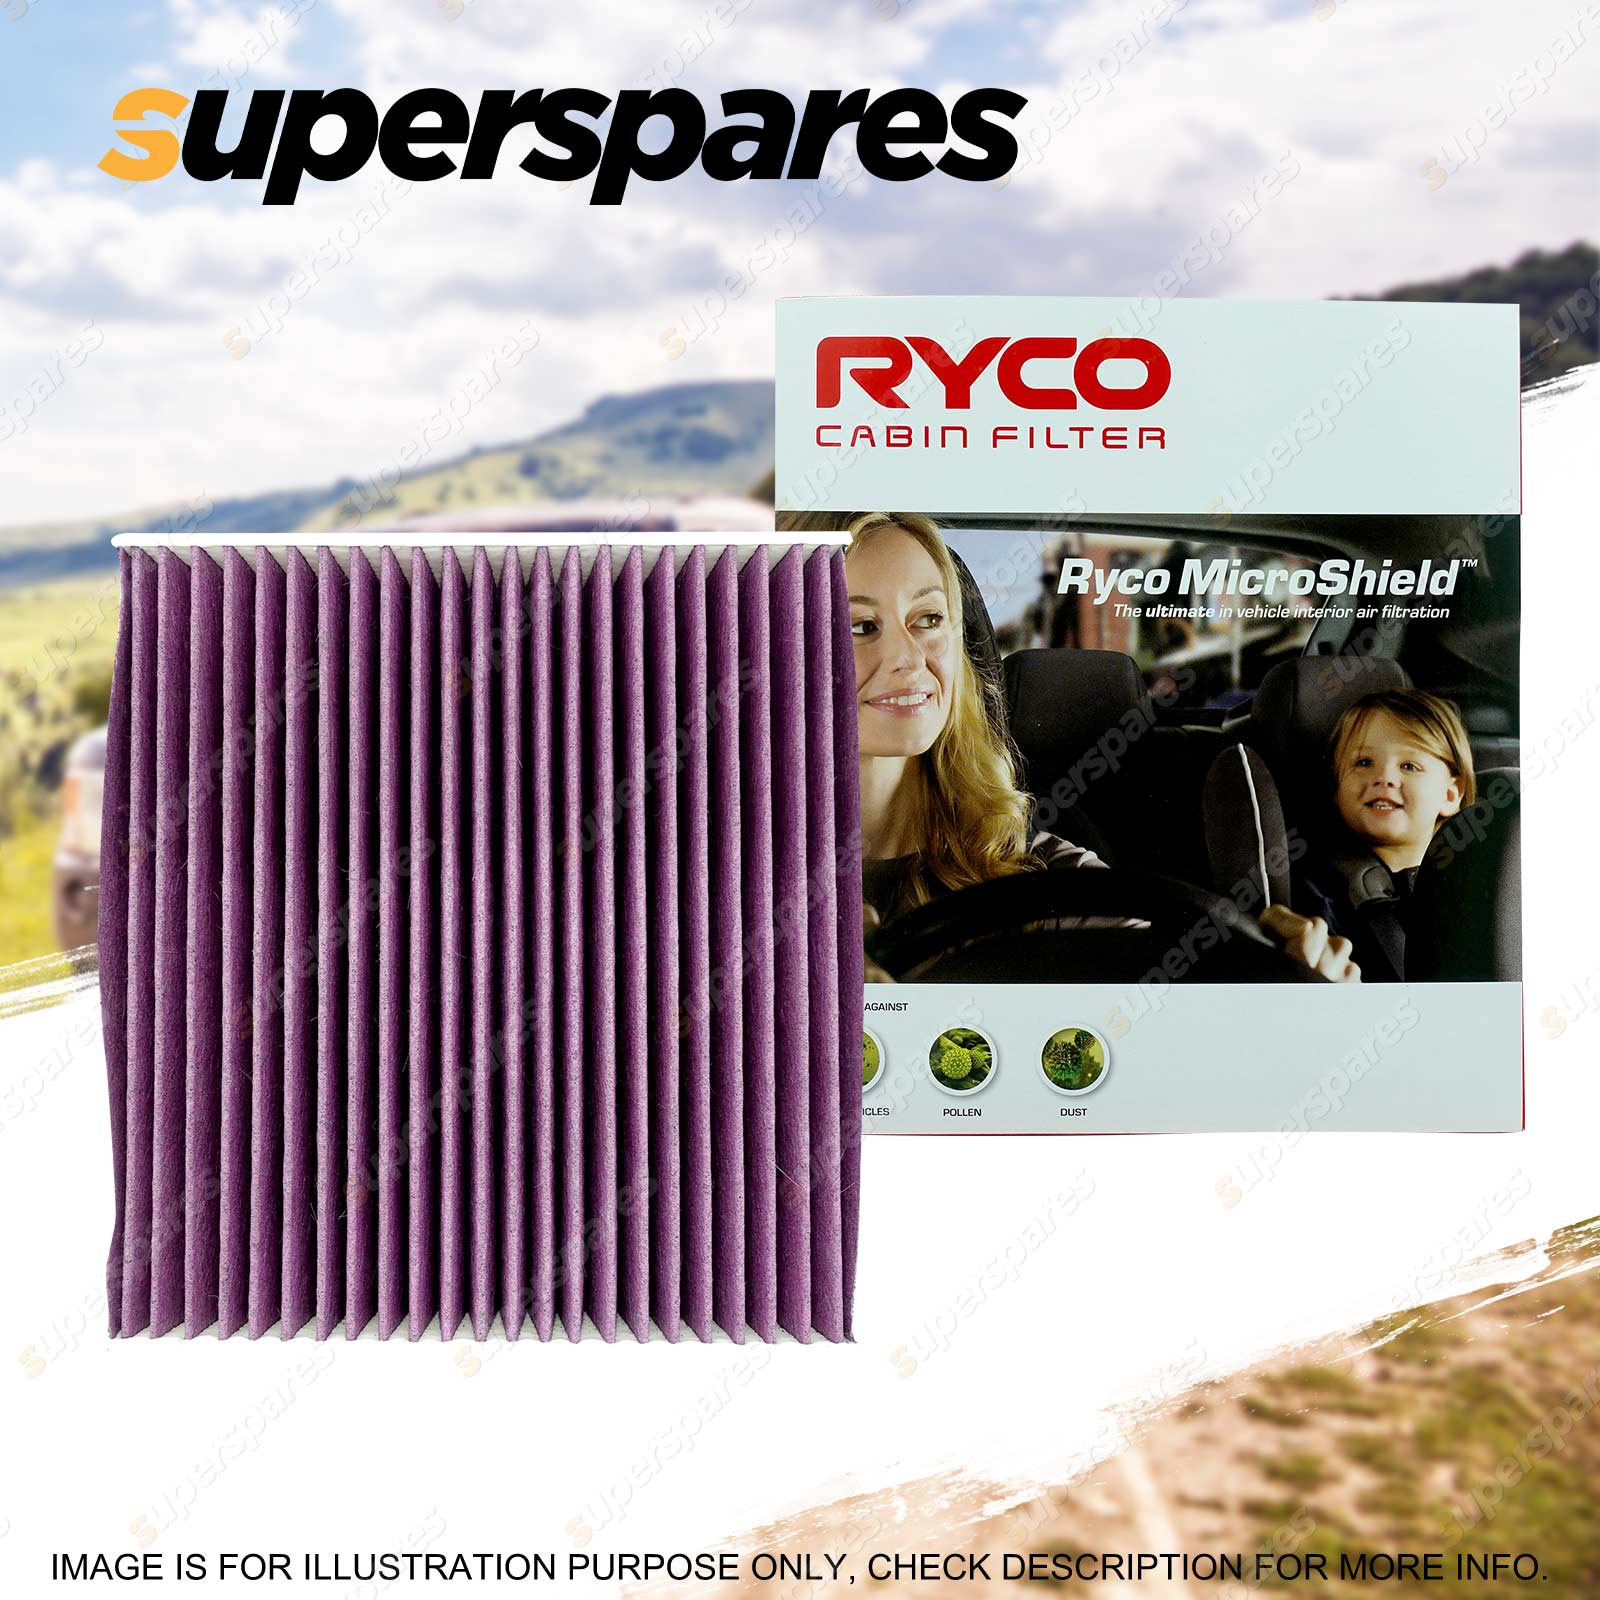 Ryco Cabin Air Filter for VOLKSWAGEN Golf VII PM2.5 Microshield Filter